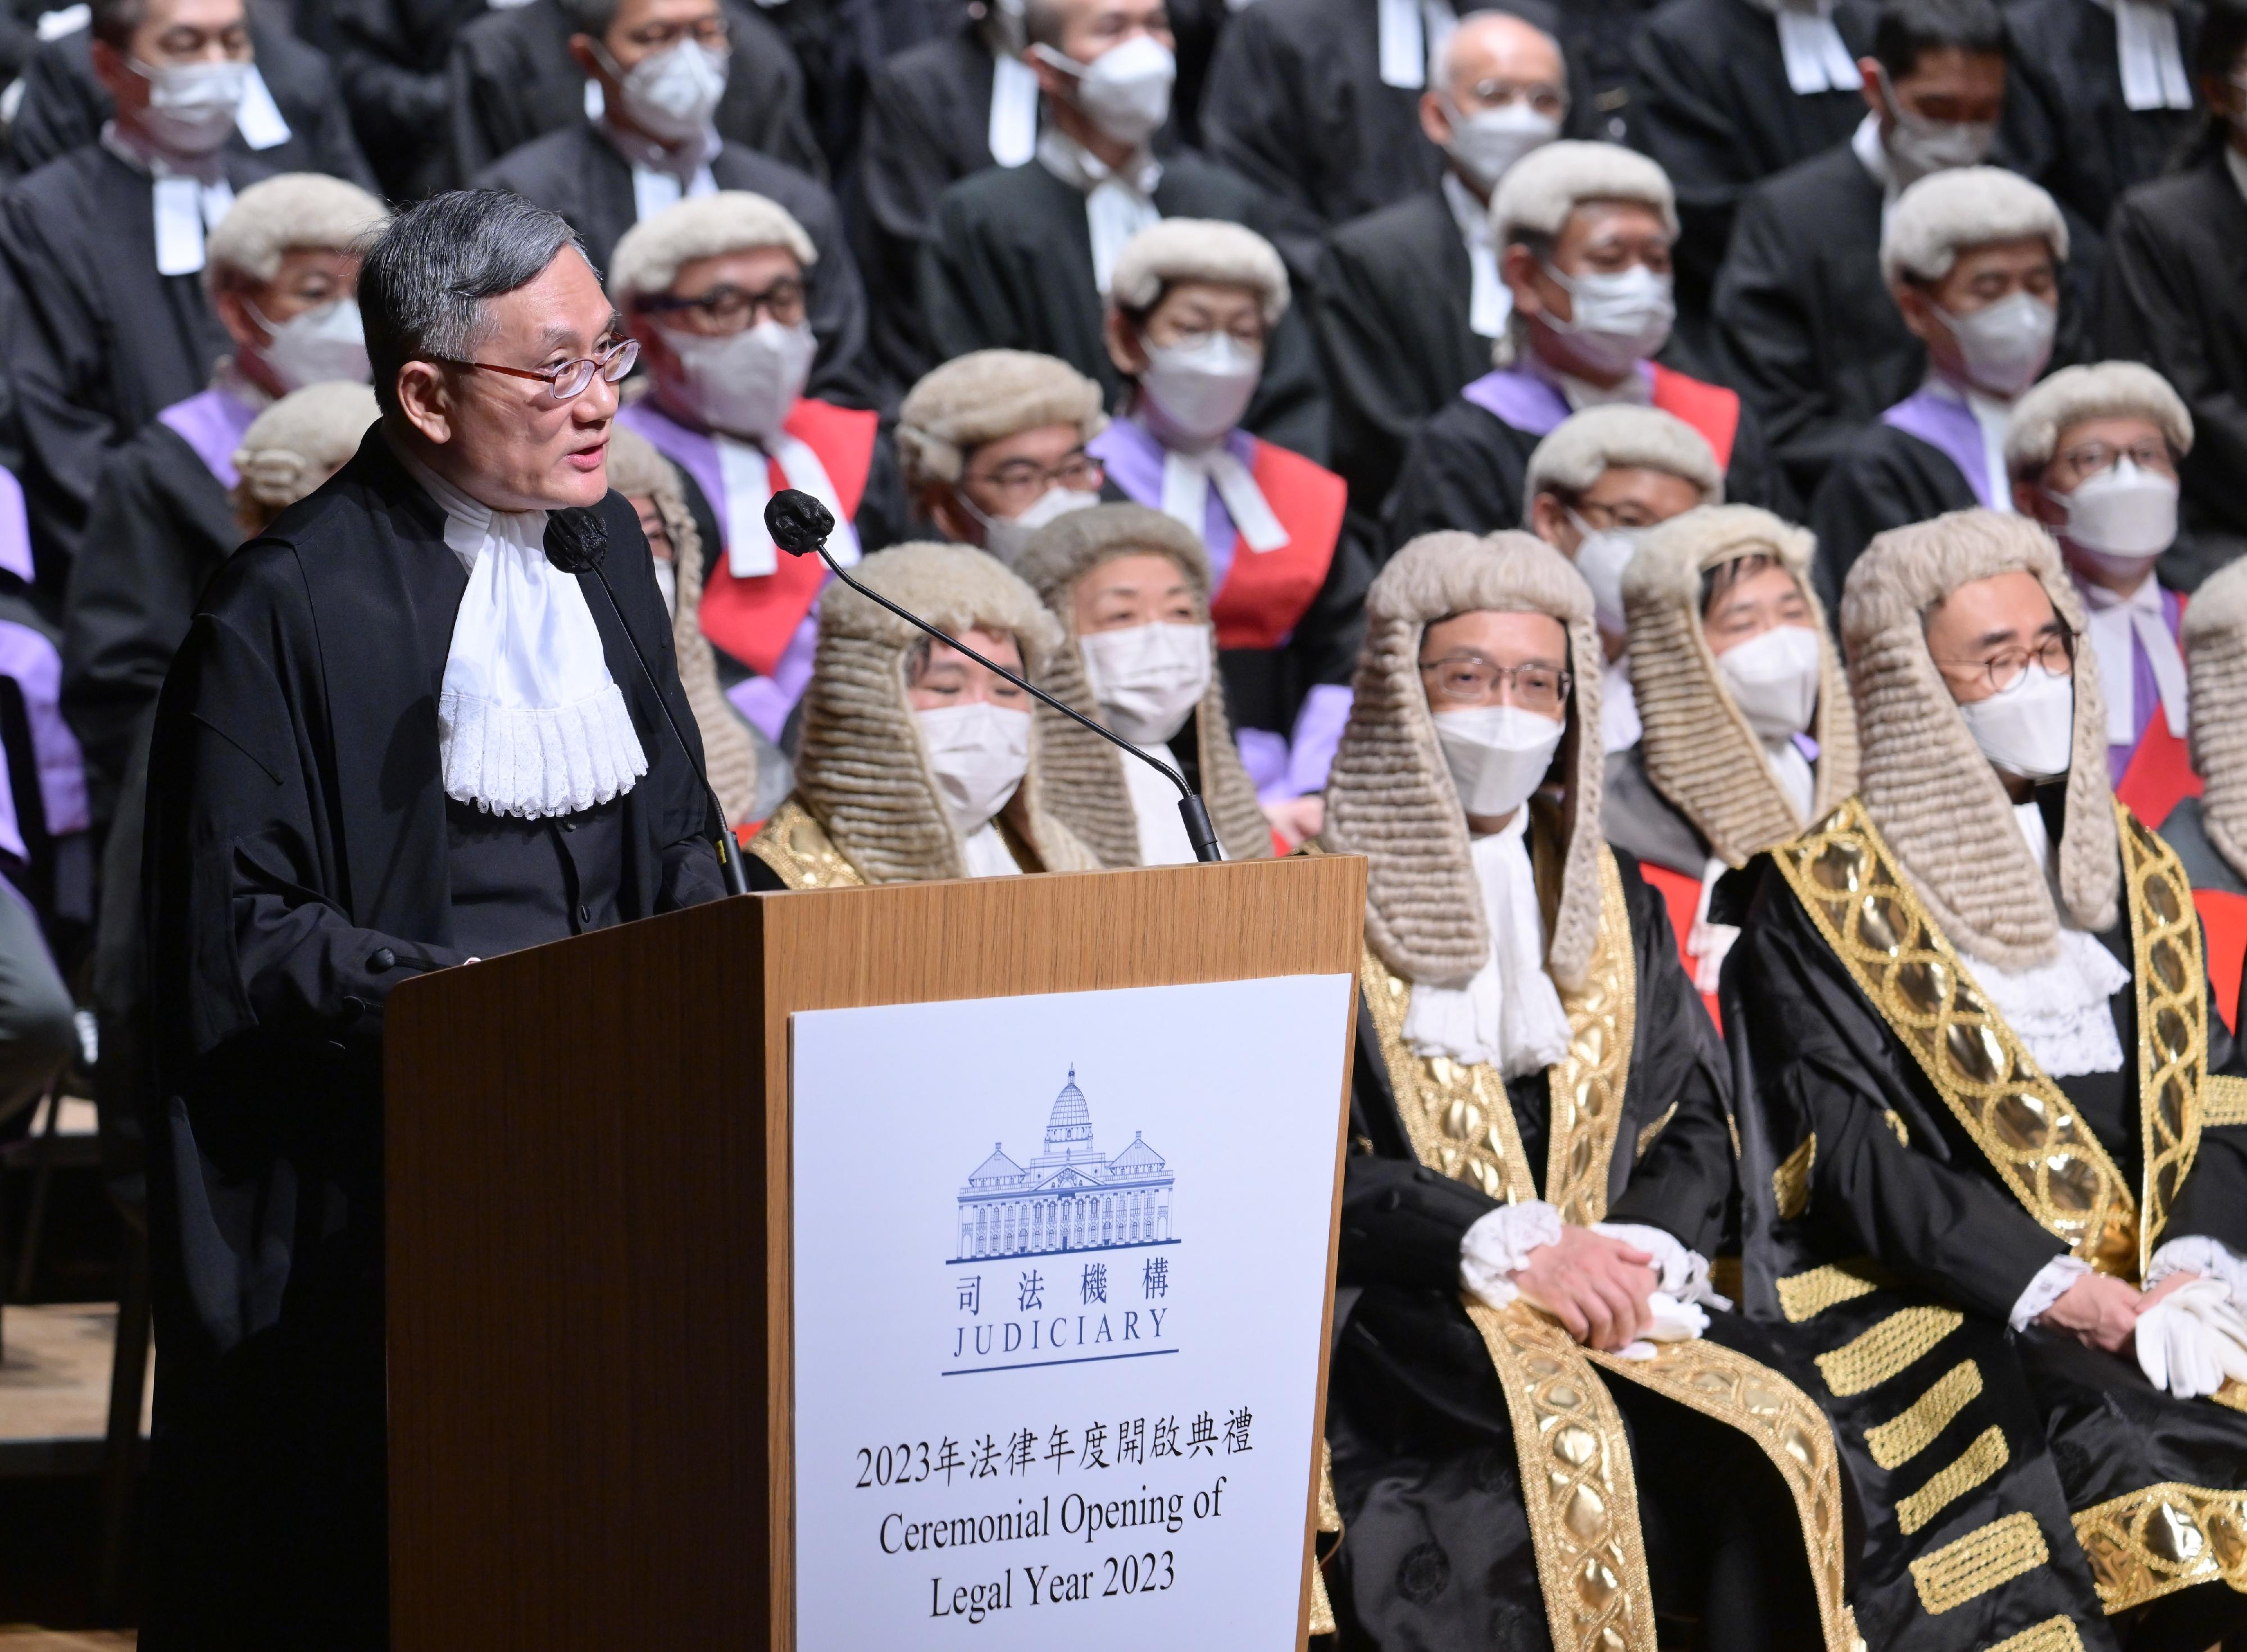 The Chief Justice of the Court of Final Appeal, Mr Andrew Cheung Kui-nung, today (January 16) gives an address at the Ceremonial Opening of the Legal Year 2023.
